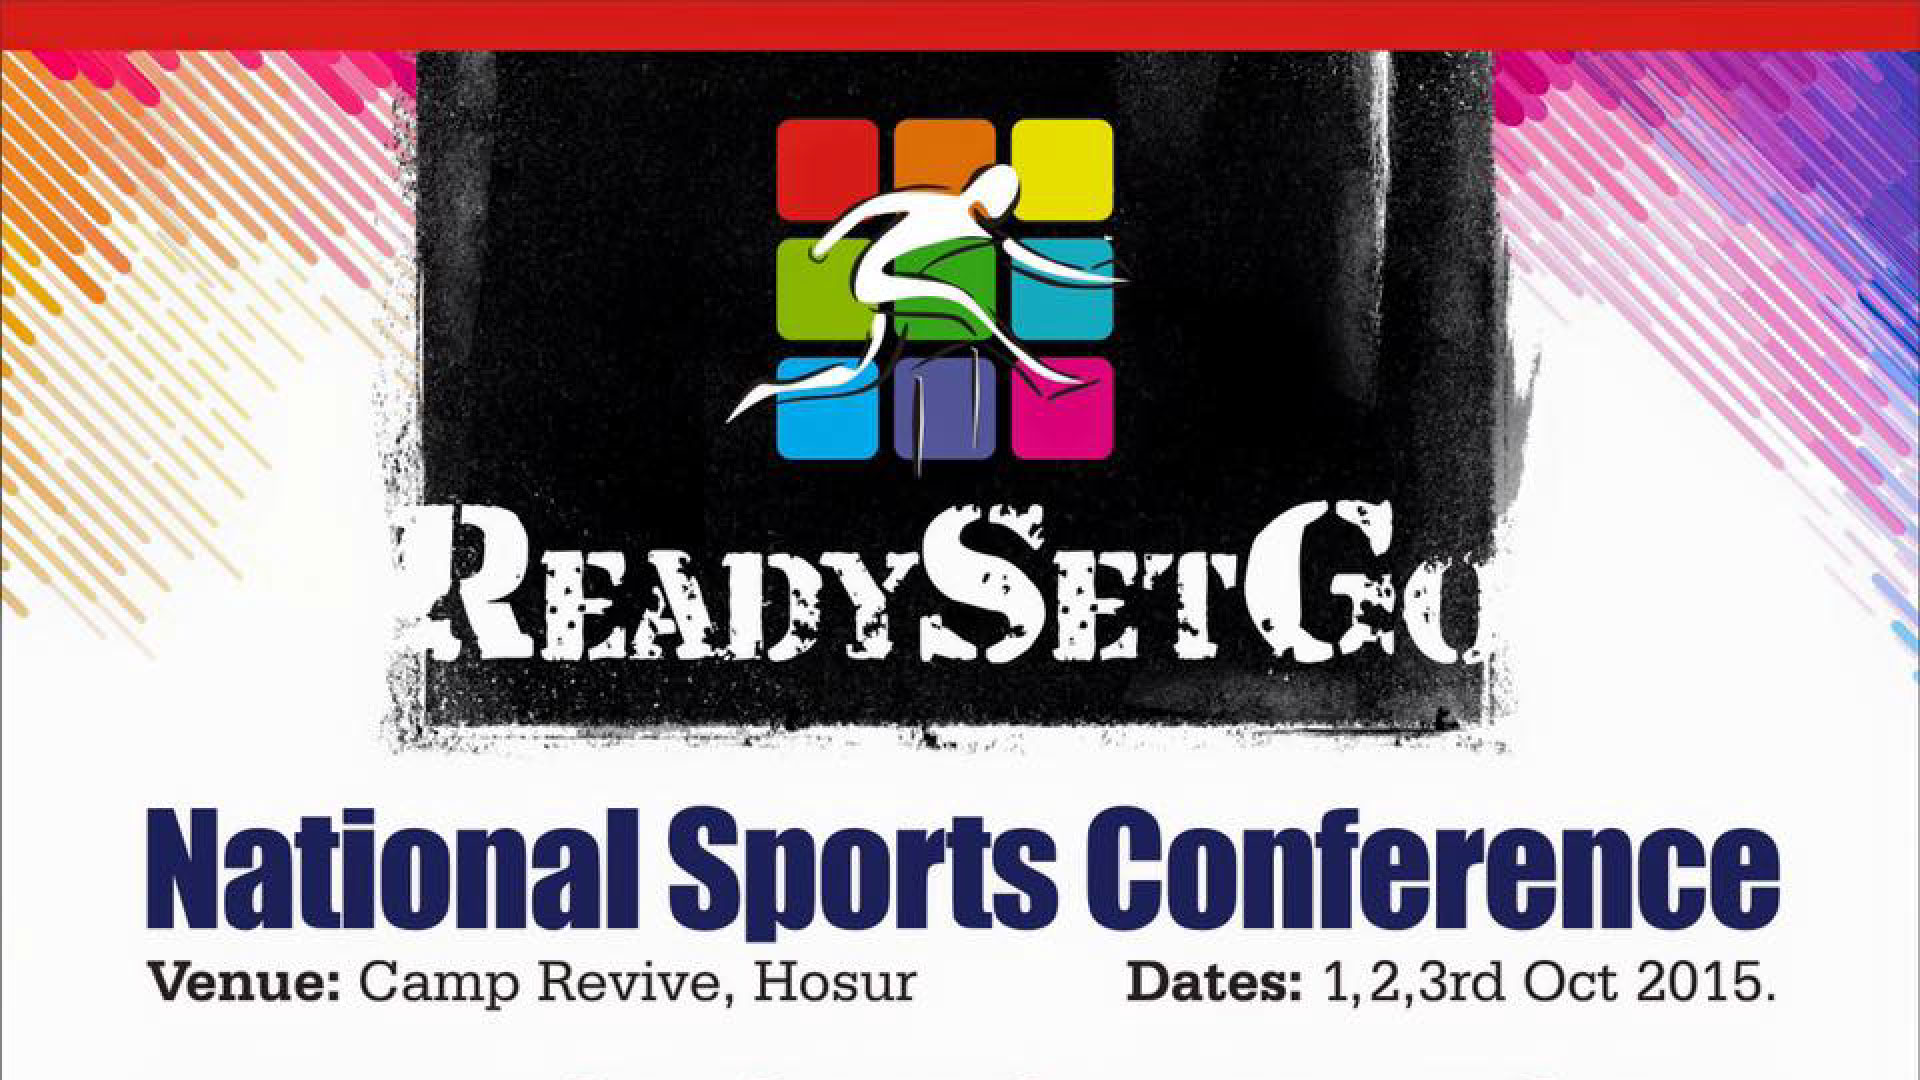 National Sports Conference 2015